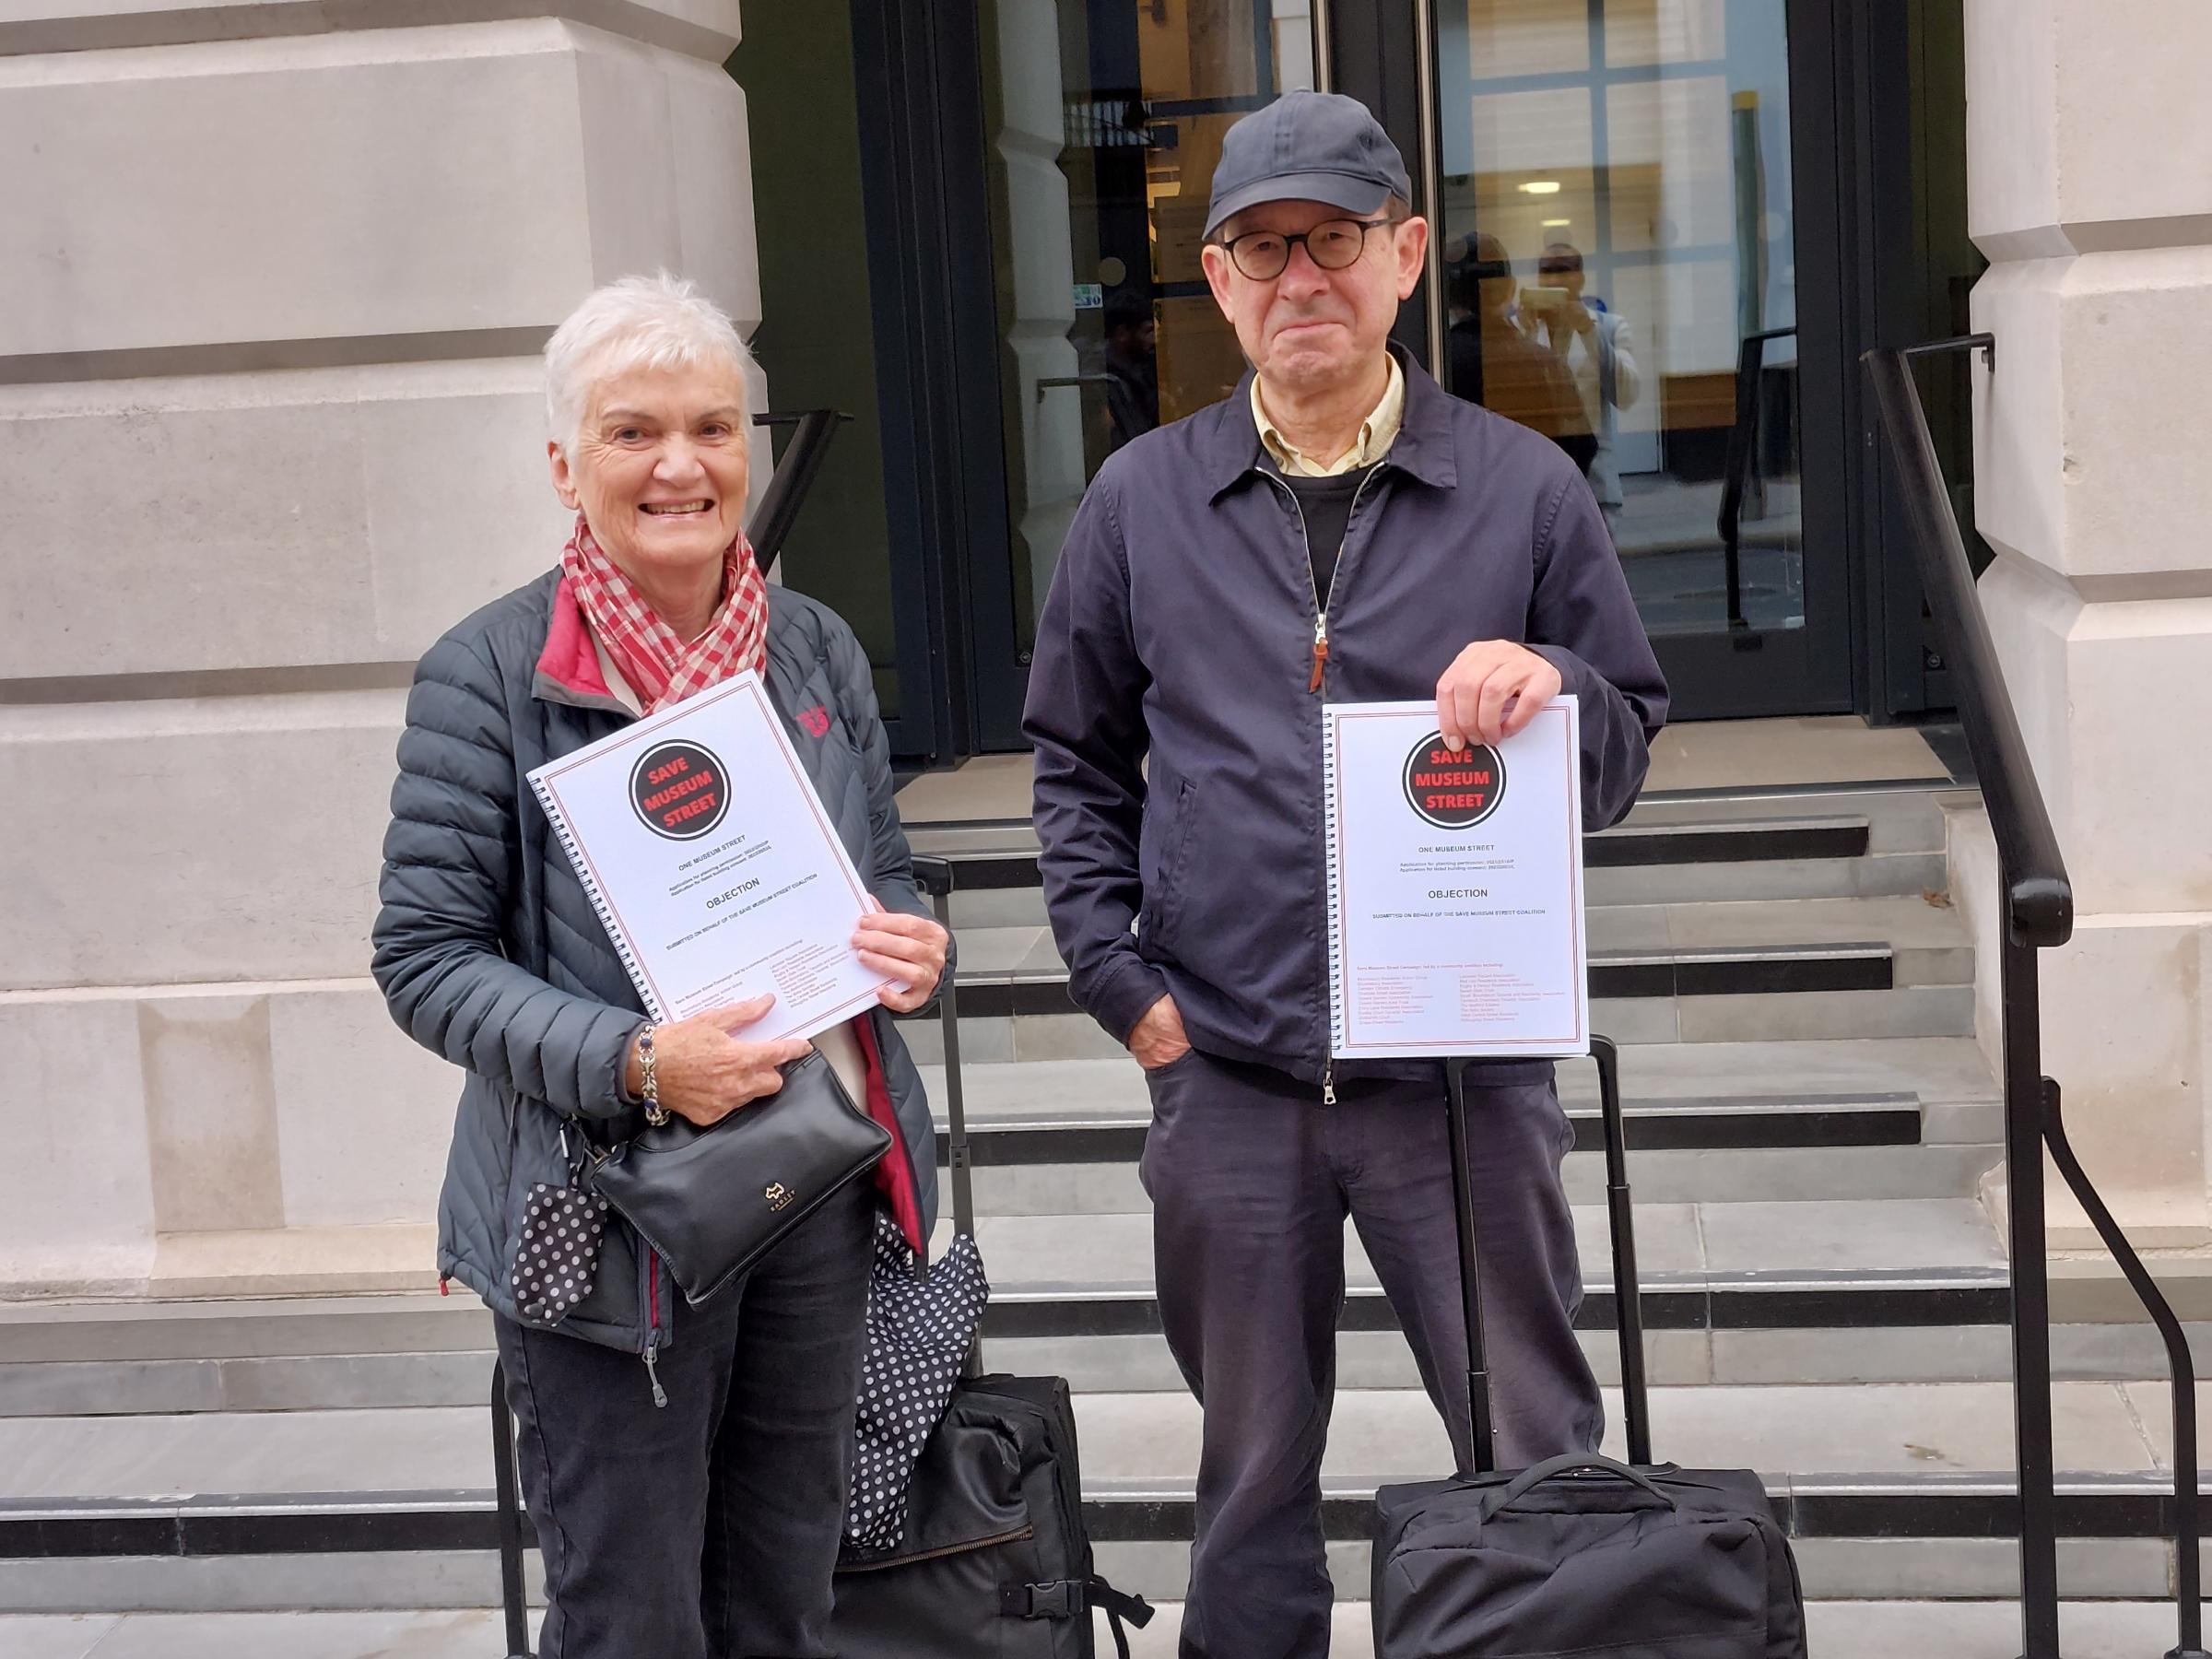 Save Museum St campaigners deliver their objection document to Camden Council. Photo: Save Museum Street